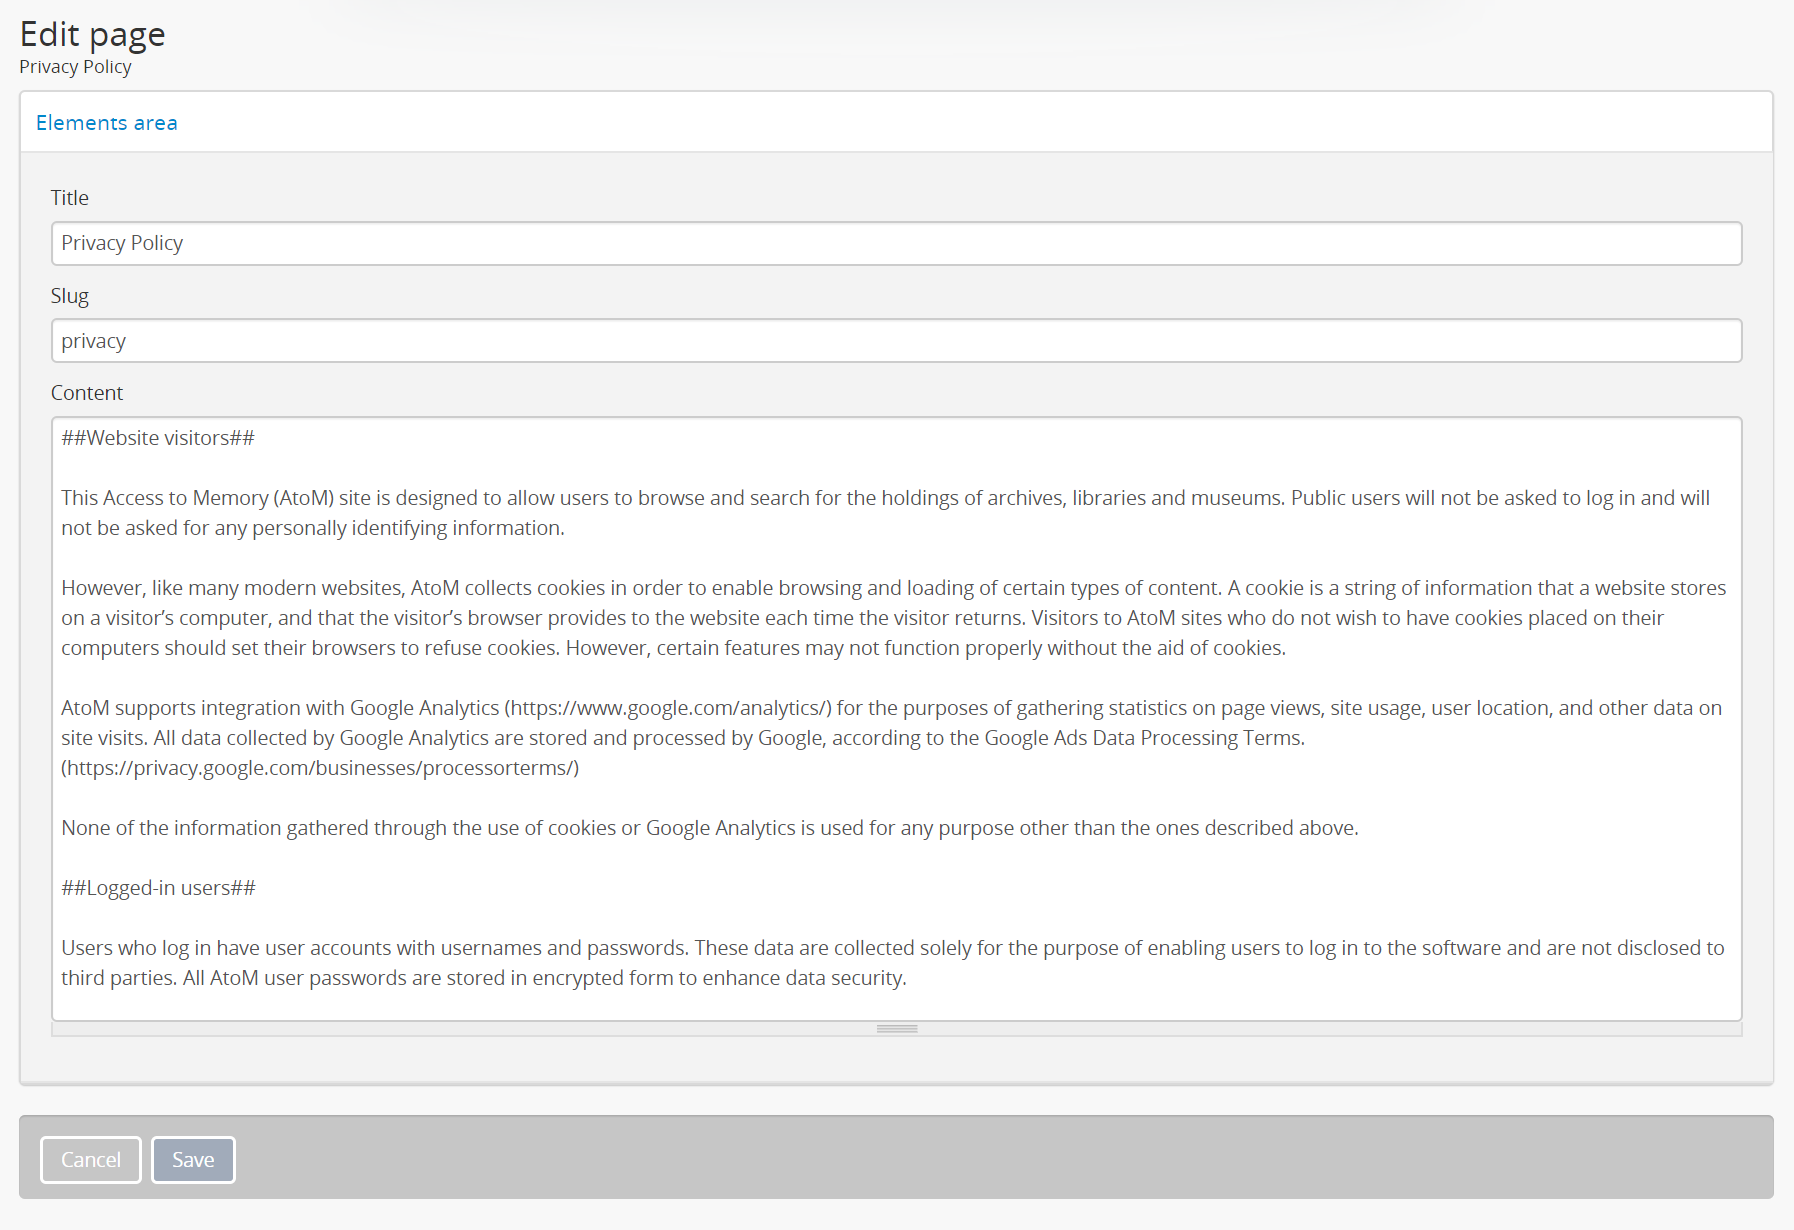 An image of the Privacy policy static page in edit mode